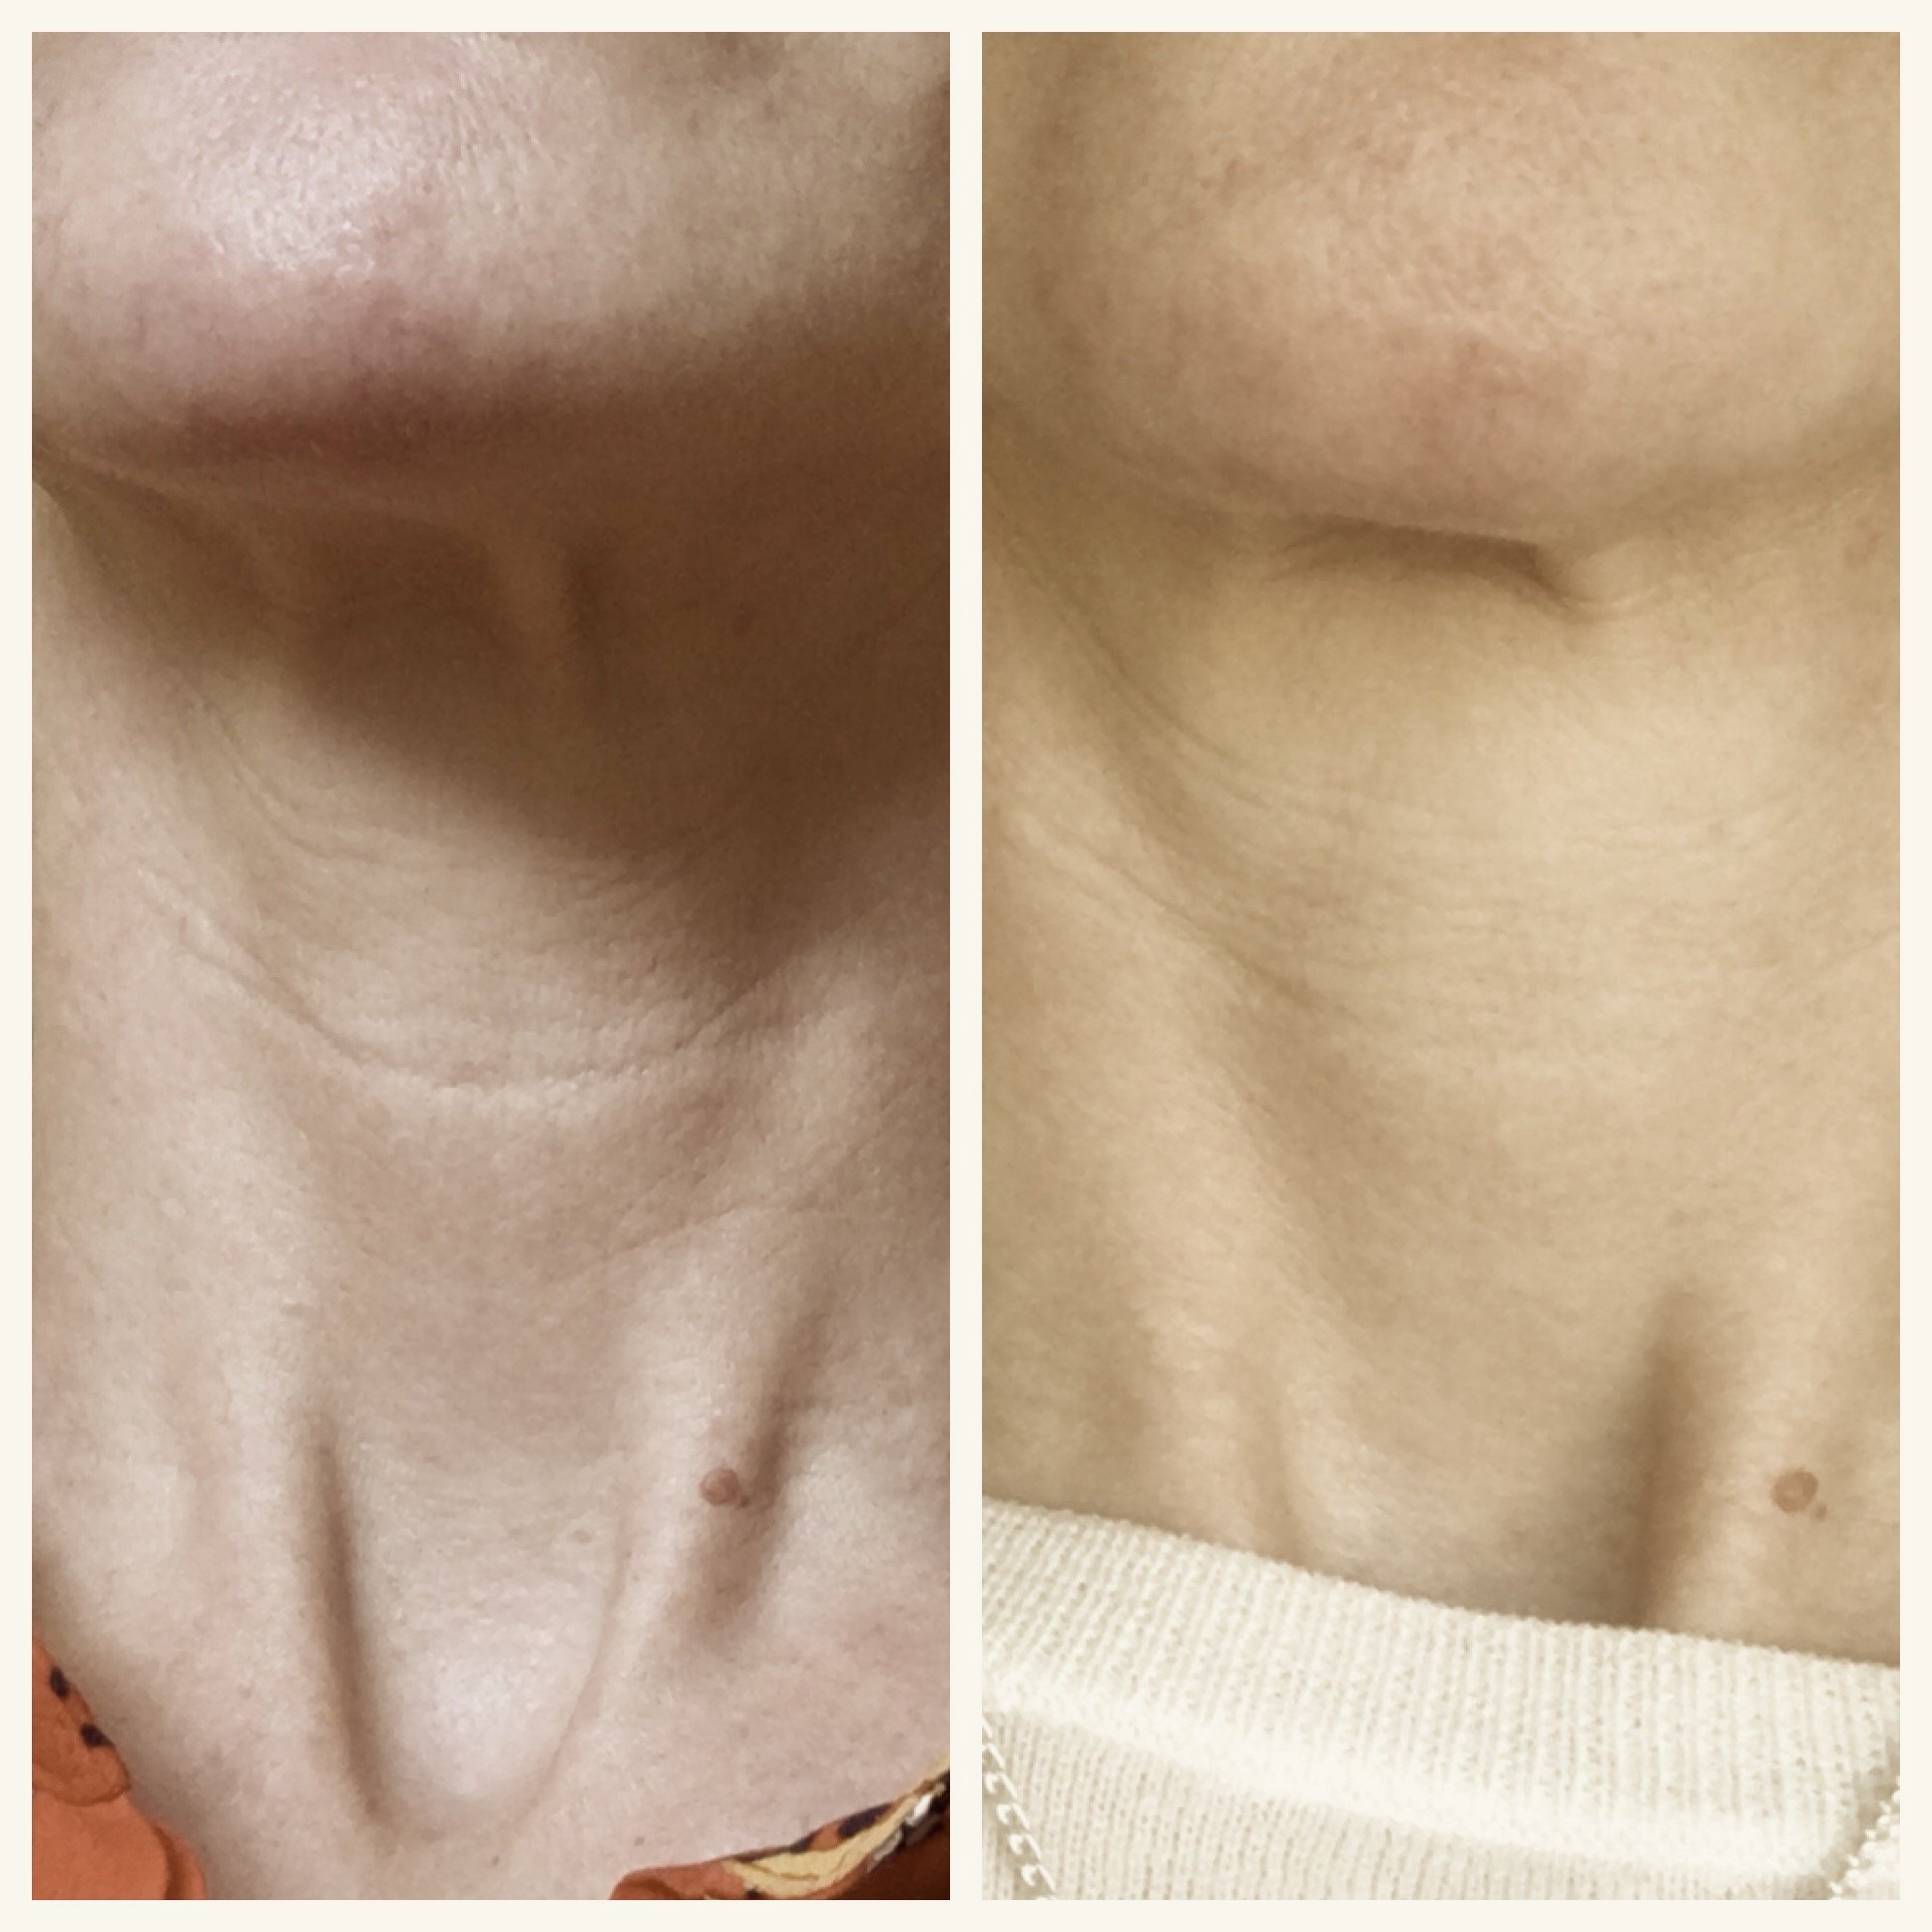  My neck before (left) and after treatment. The light's not the same, but you can see the change 